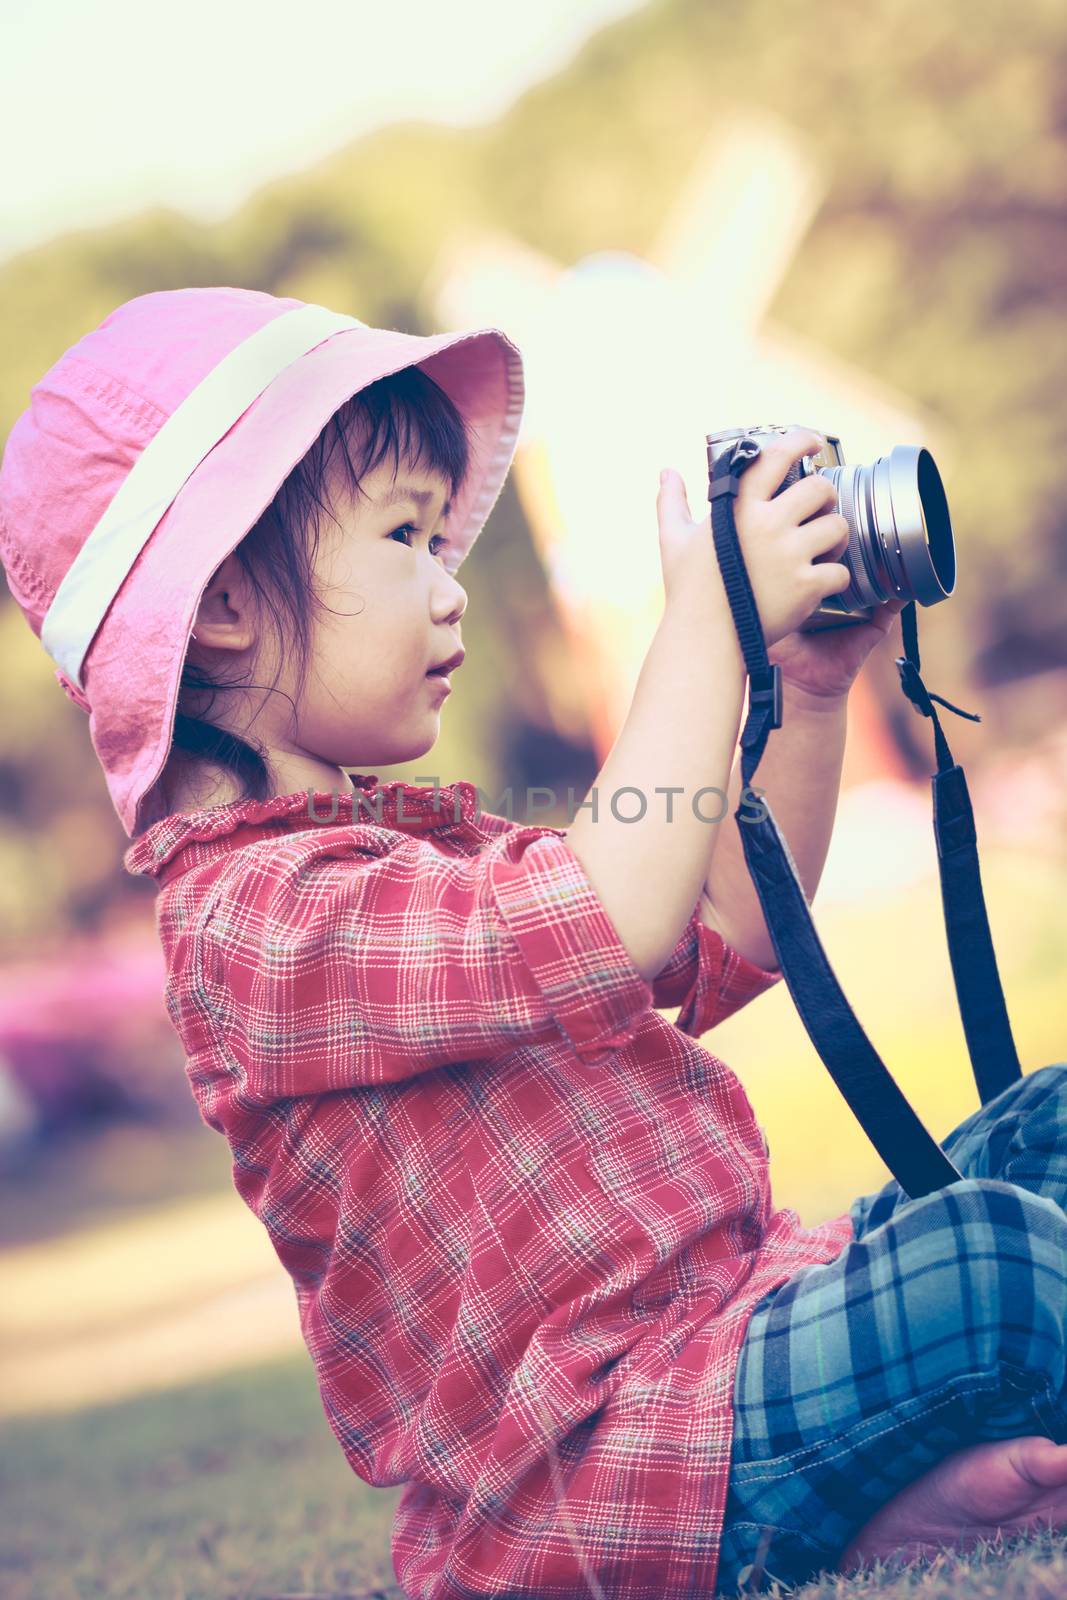 Cute little asian girl taking photos using vintage film camera in the park on blurred background, summer in the day time. Adorable child in nature, outdoors. Vintage style.